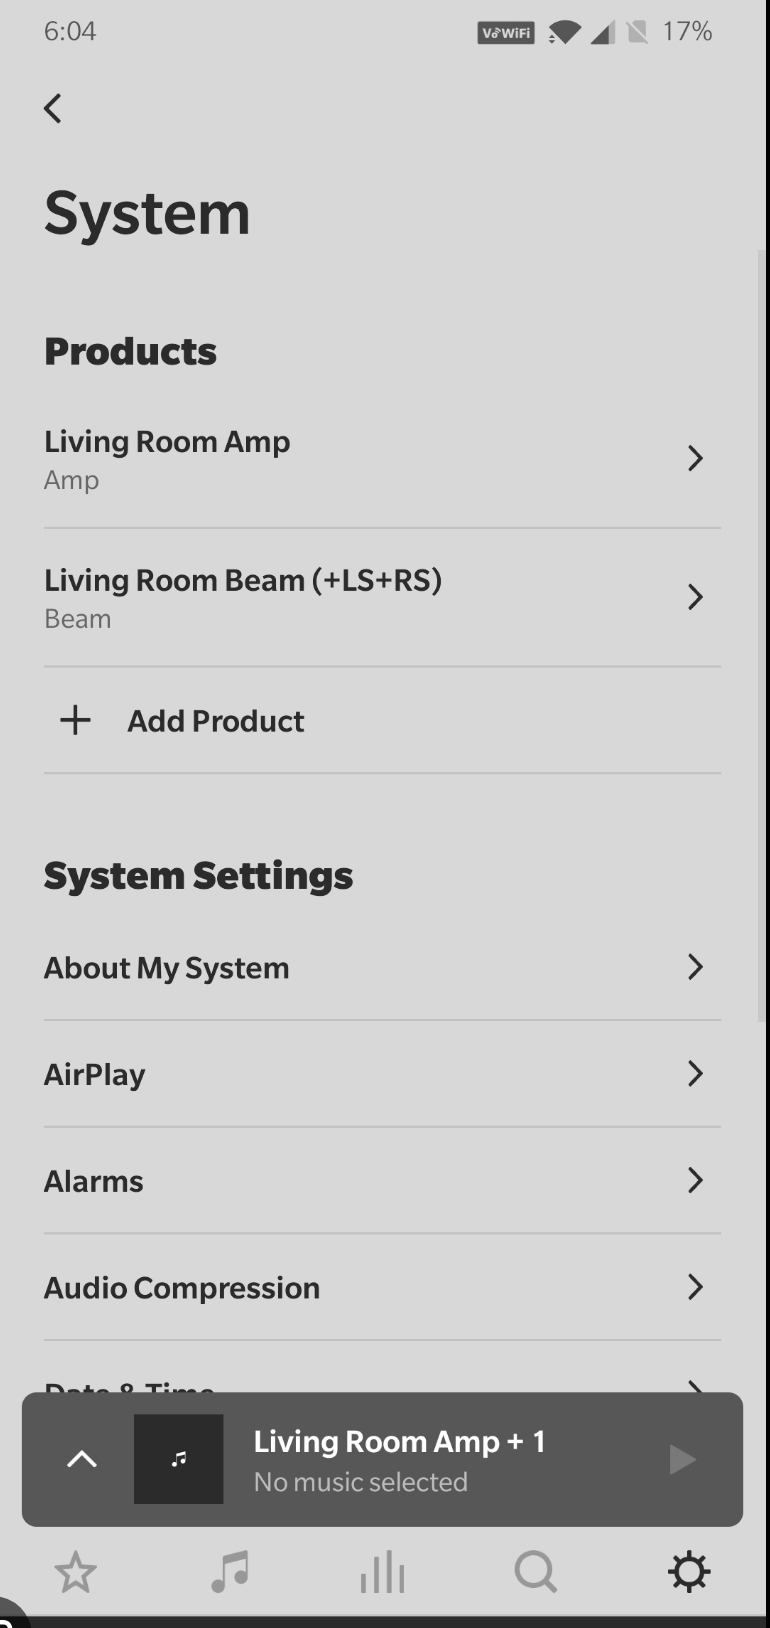 Option to add a new product in Sonos System.